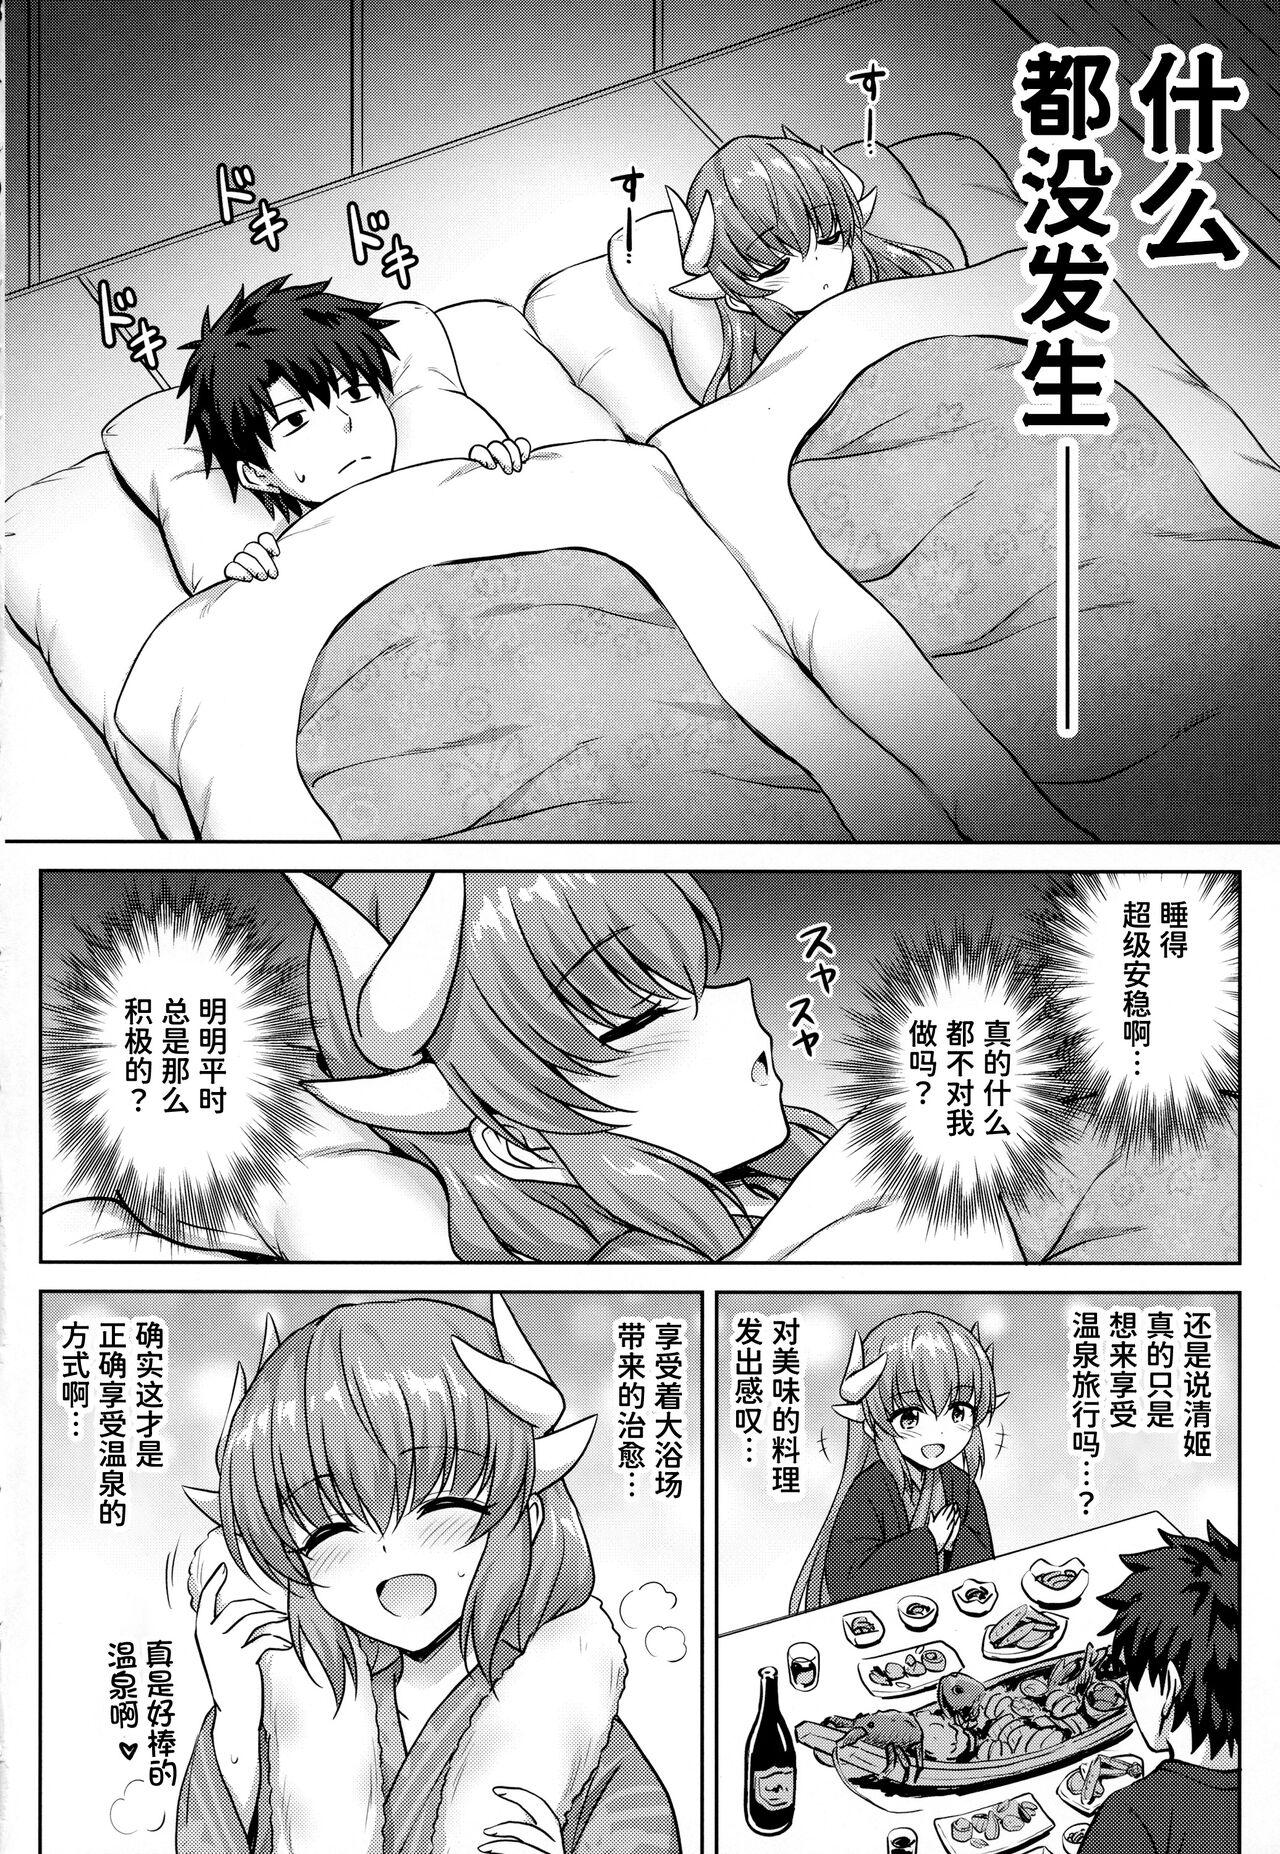 Jerkoff Kiyohime Onsen - Fate grand order Rubdown - Page 4